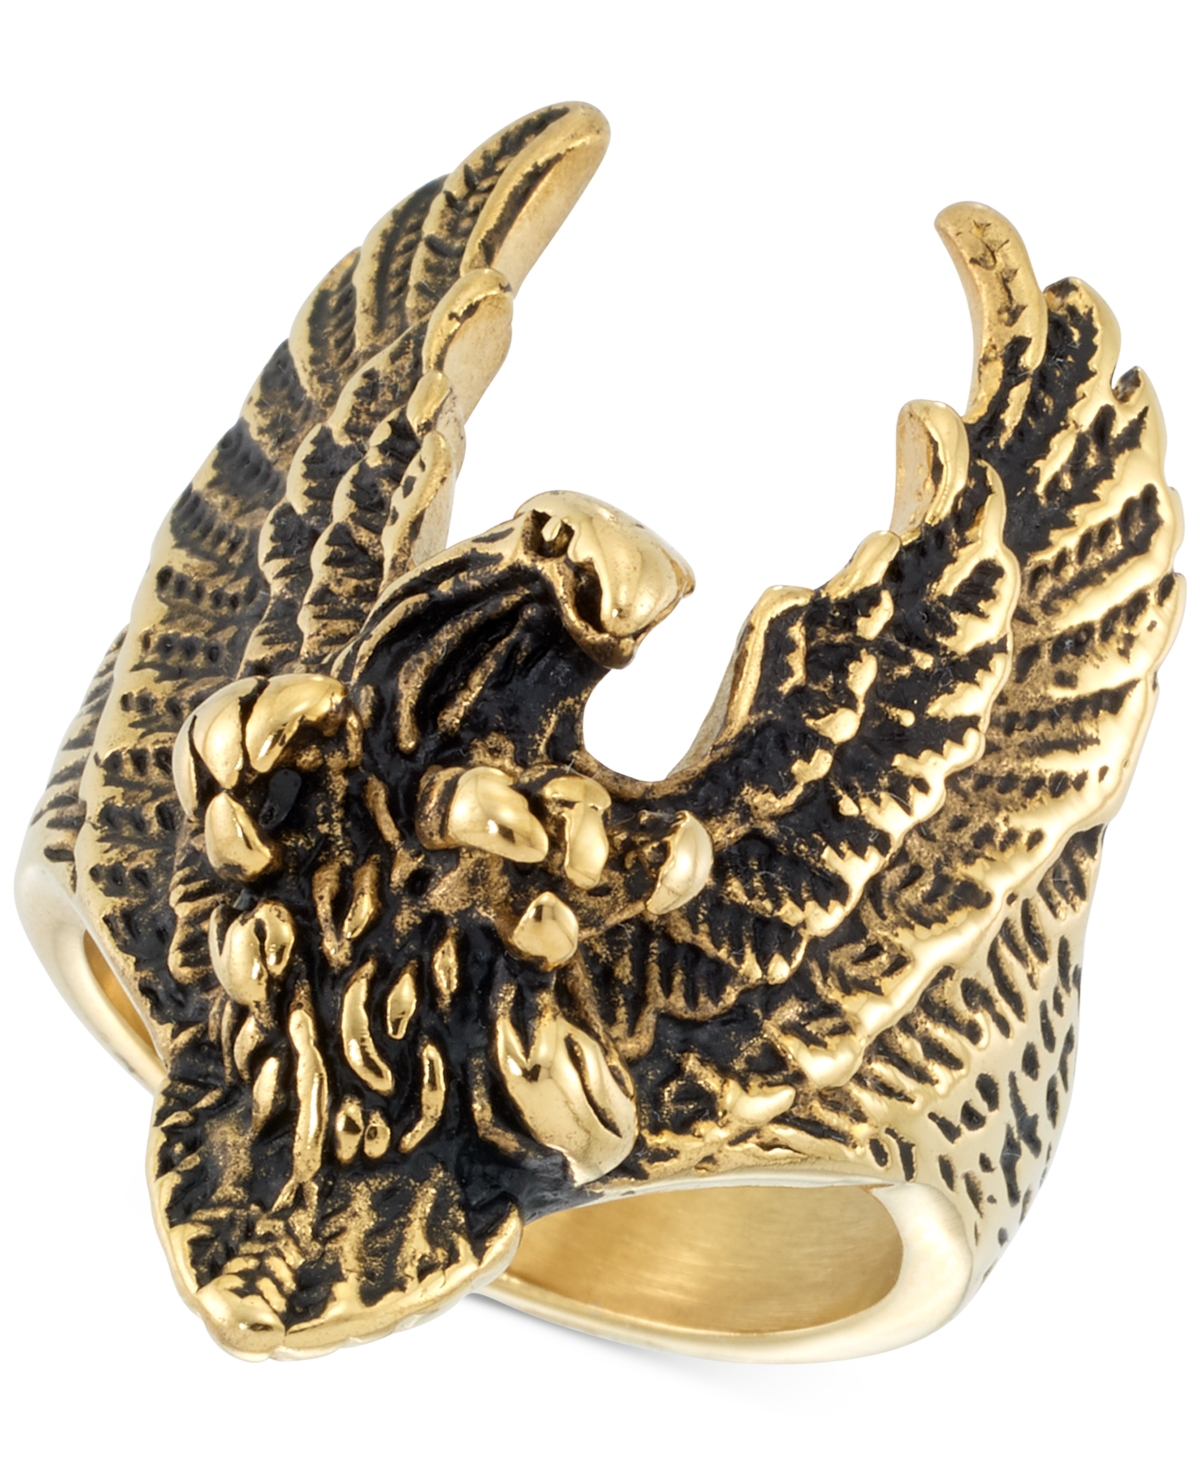 Smith Yellow & Black Ion-Plated Eagle Ring in Stainless Steel - Gold Tone